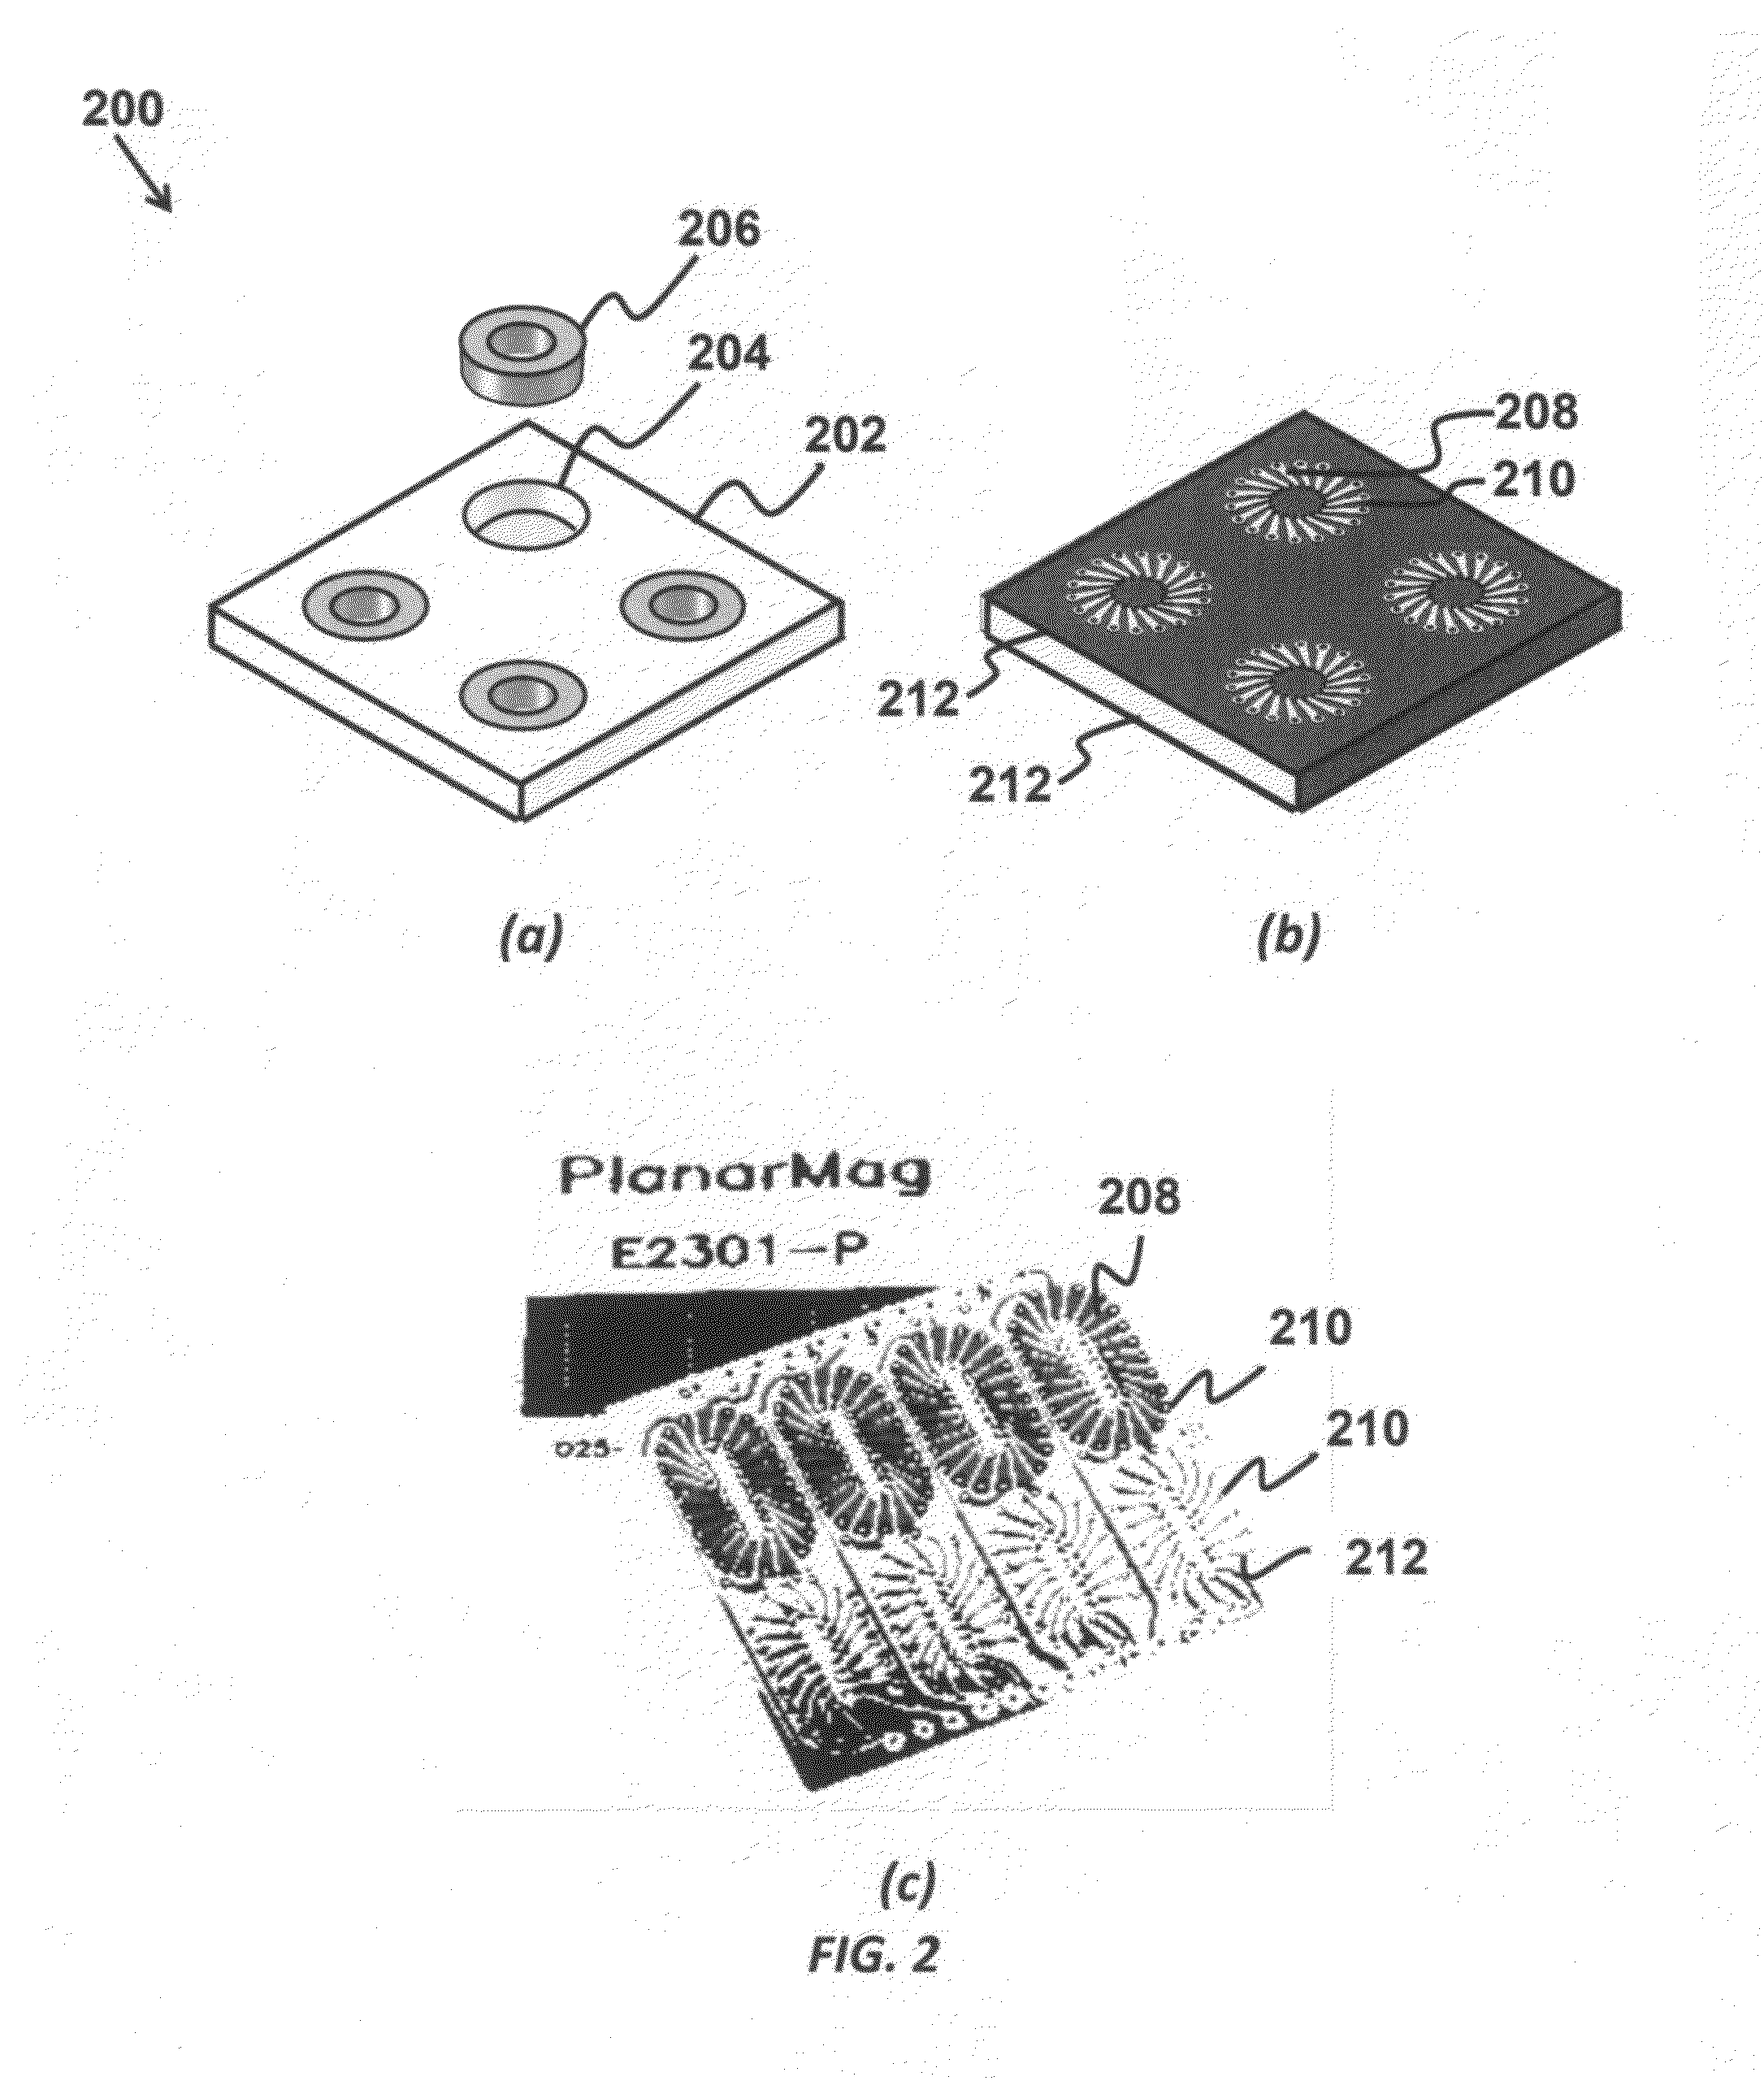 Manufacture and use of planar embedded magnetics as discrete components and in integrated connectors